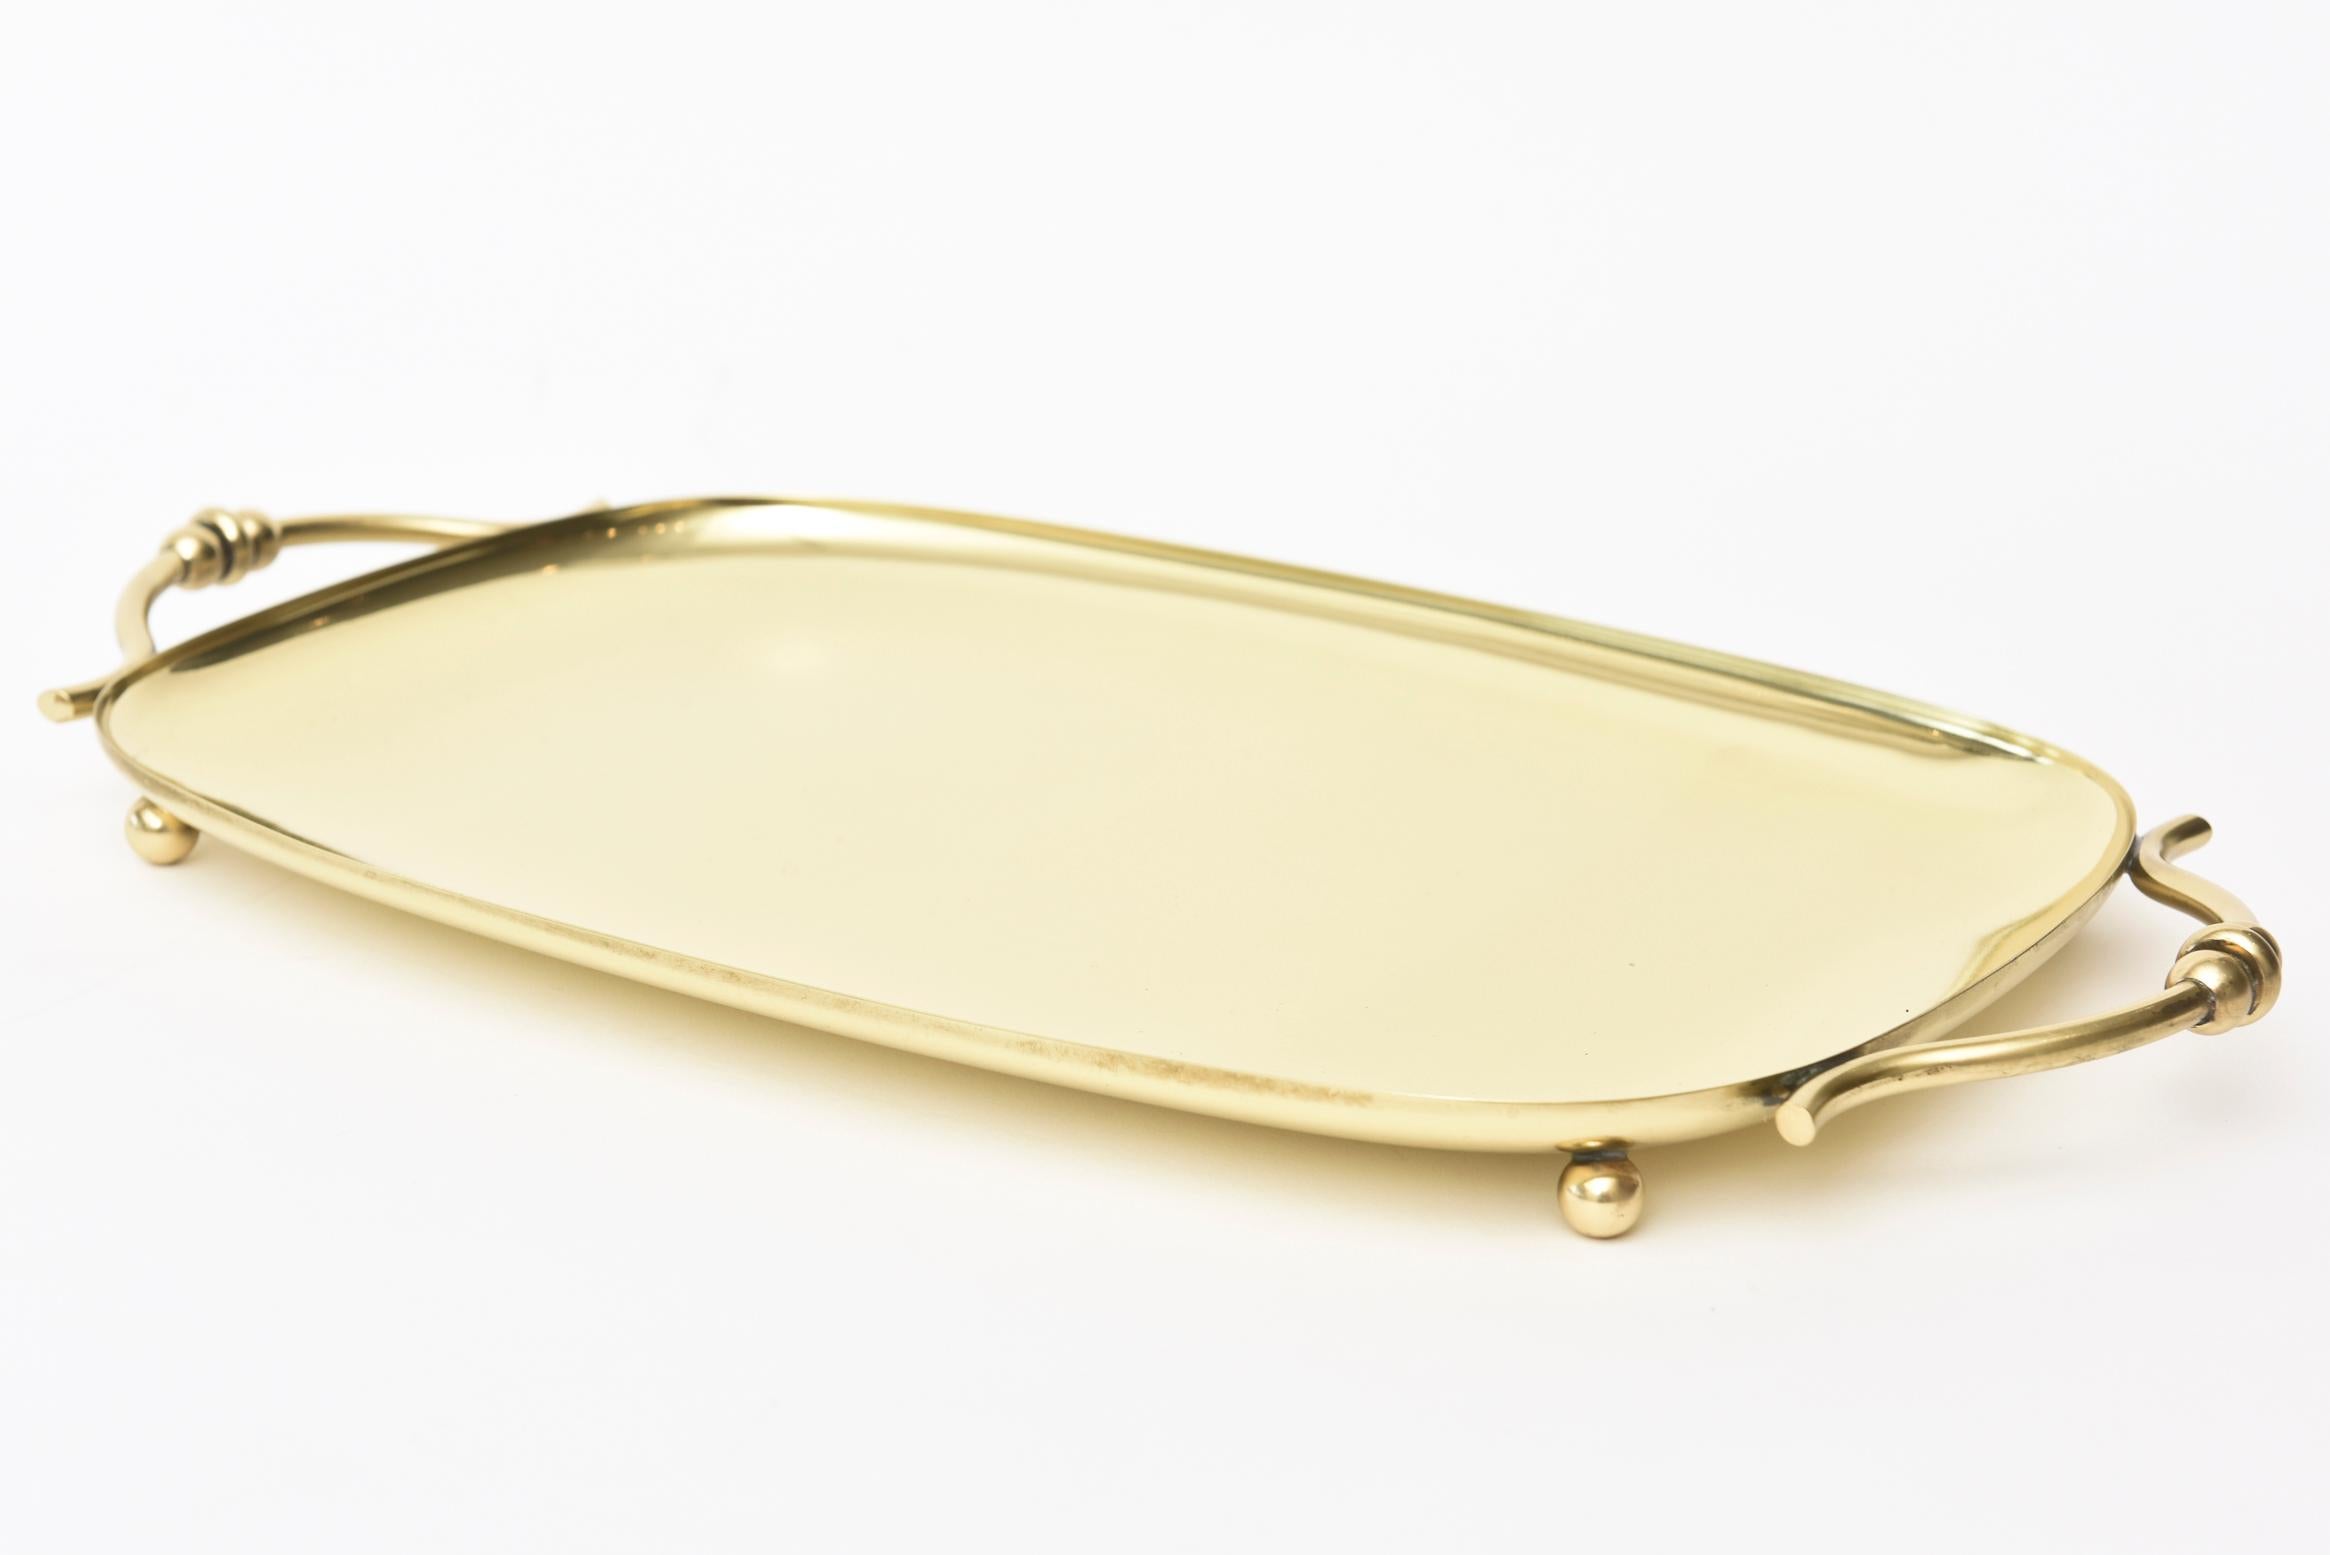 This hallmarked brass tray by Dorlyn silversmiths for Tommi Parzinger is Mid-Century Modern. The tray has 4 ball feet and curved handles at either end. It is from the 1950s and has been polished and lacquered. It is very versatile and is great